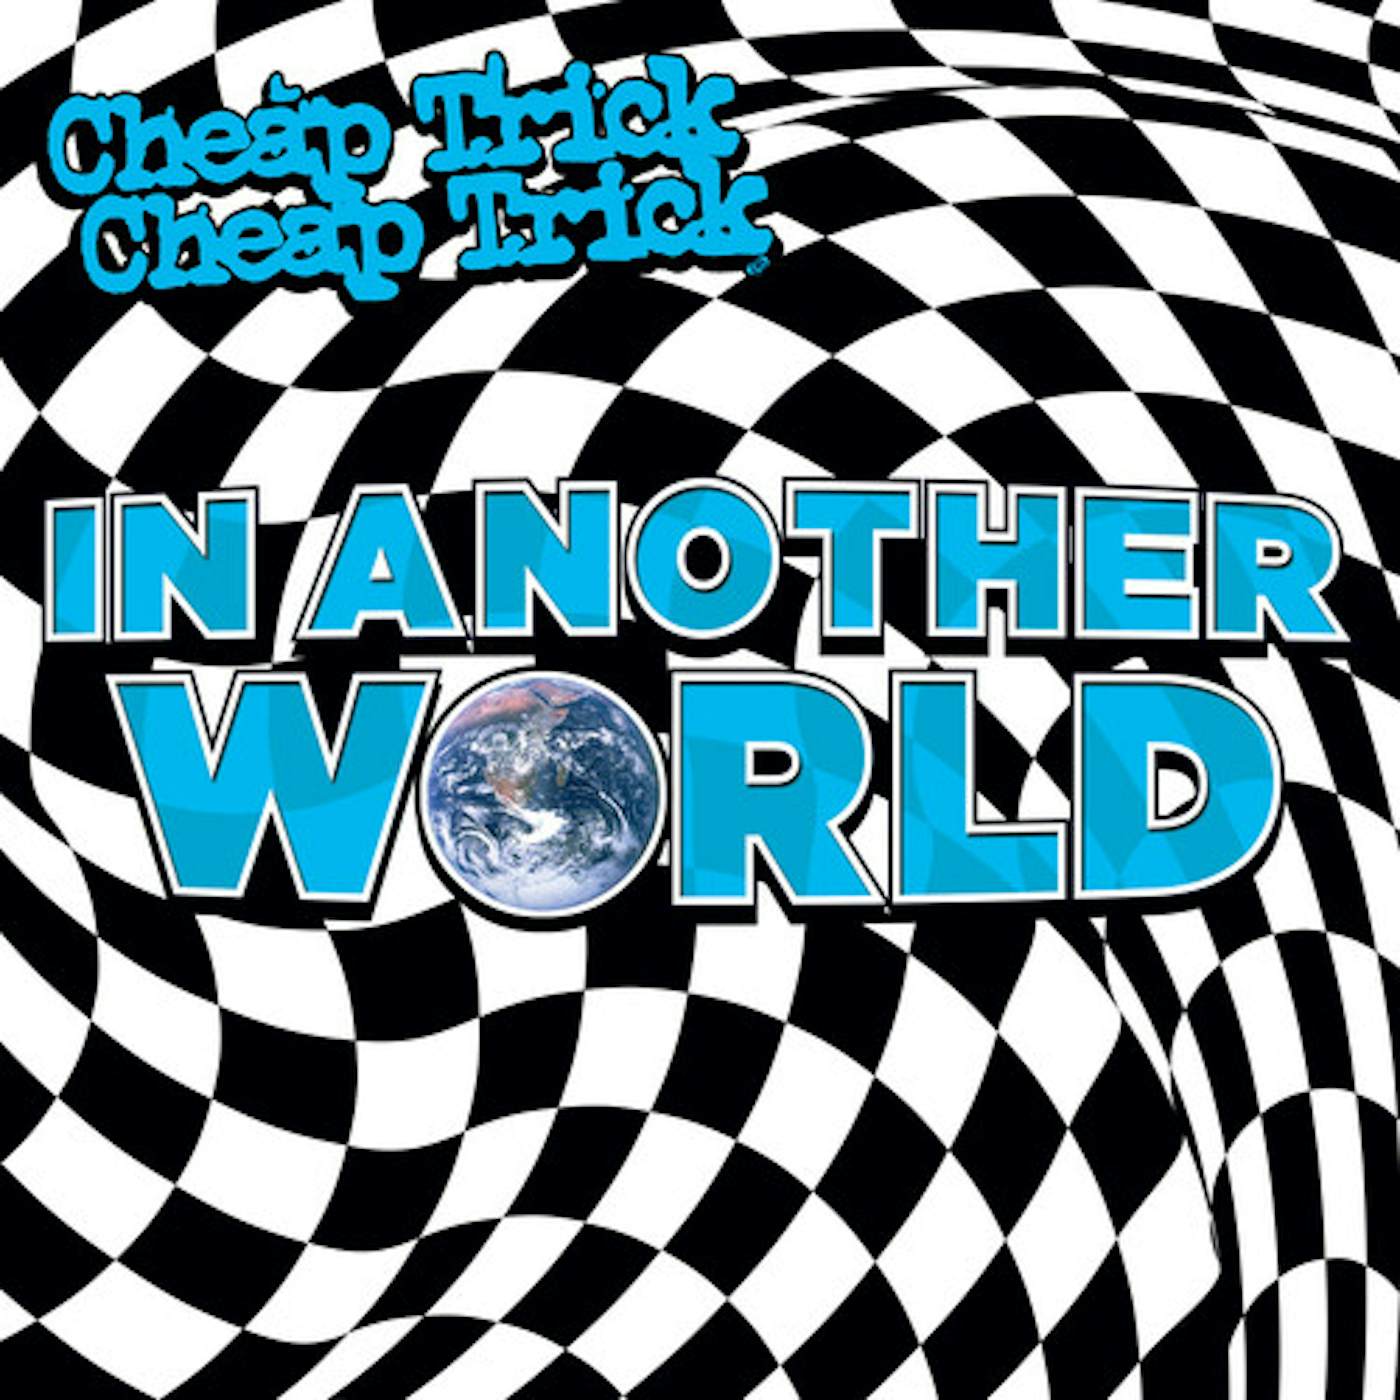 Cheap Trick IN ANOTHER WORLD CD